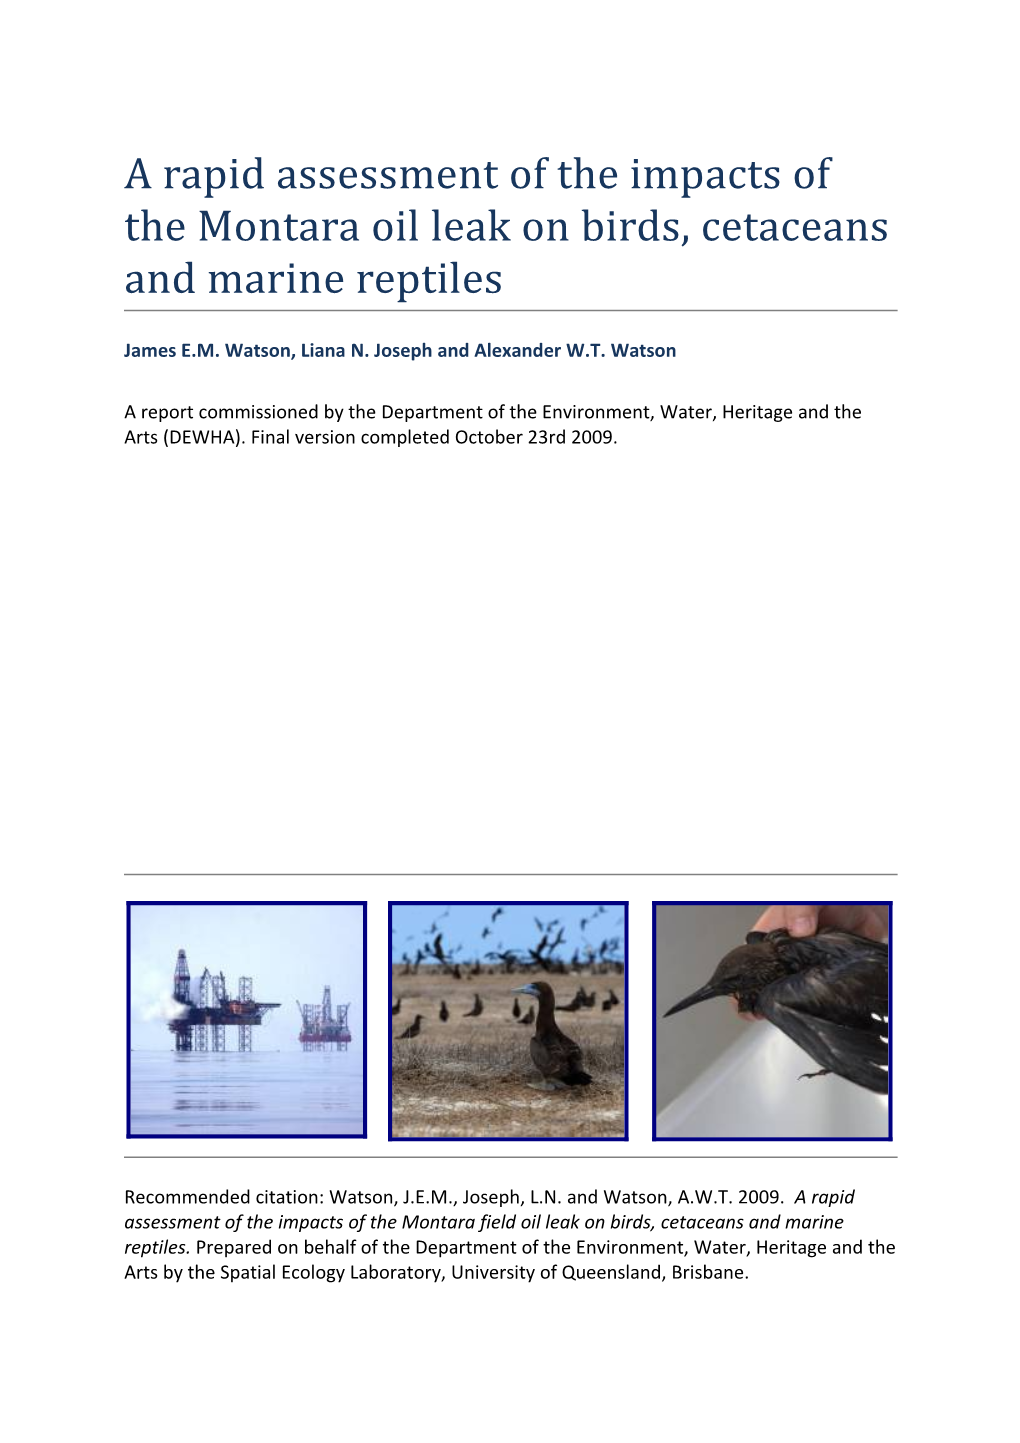 A Rapid Assessment of the Impacts of the Montara Oil Leak on Birds, Cetaceans and Marine